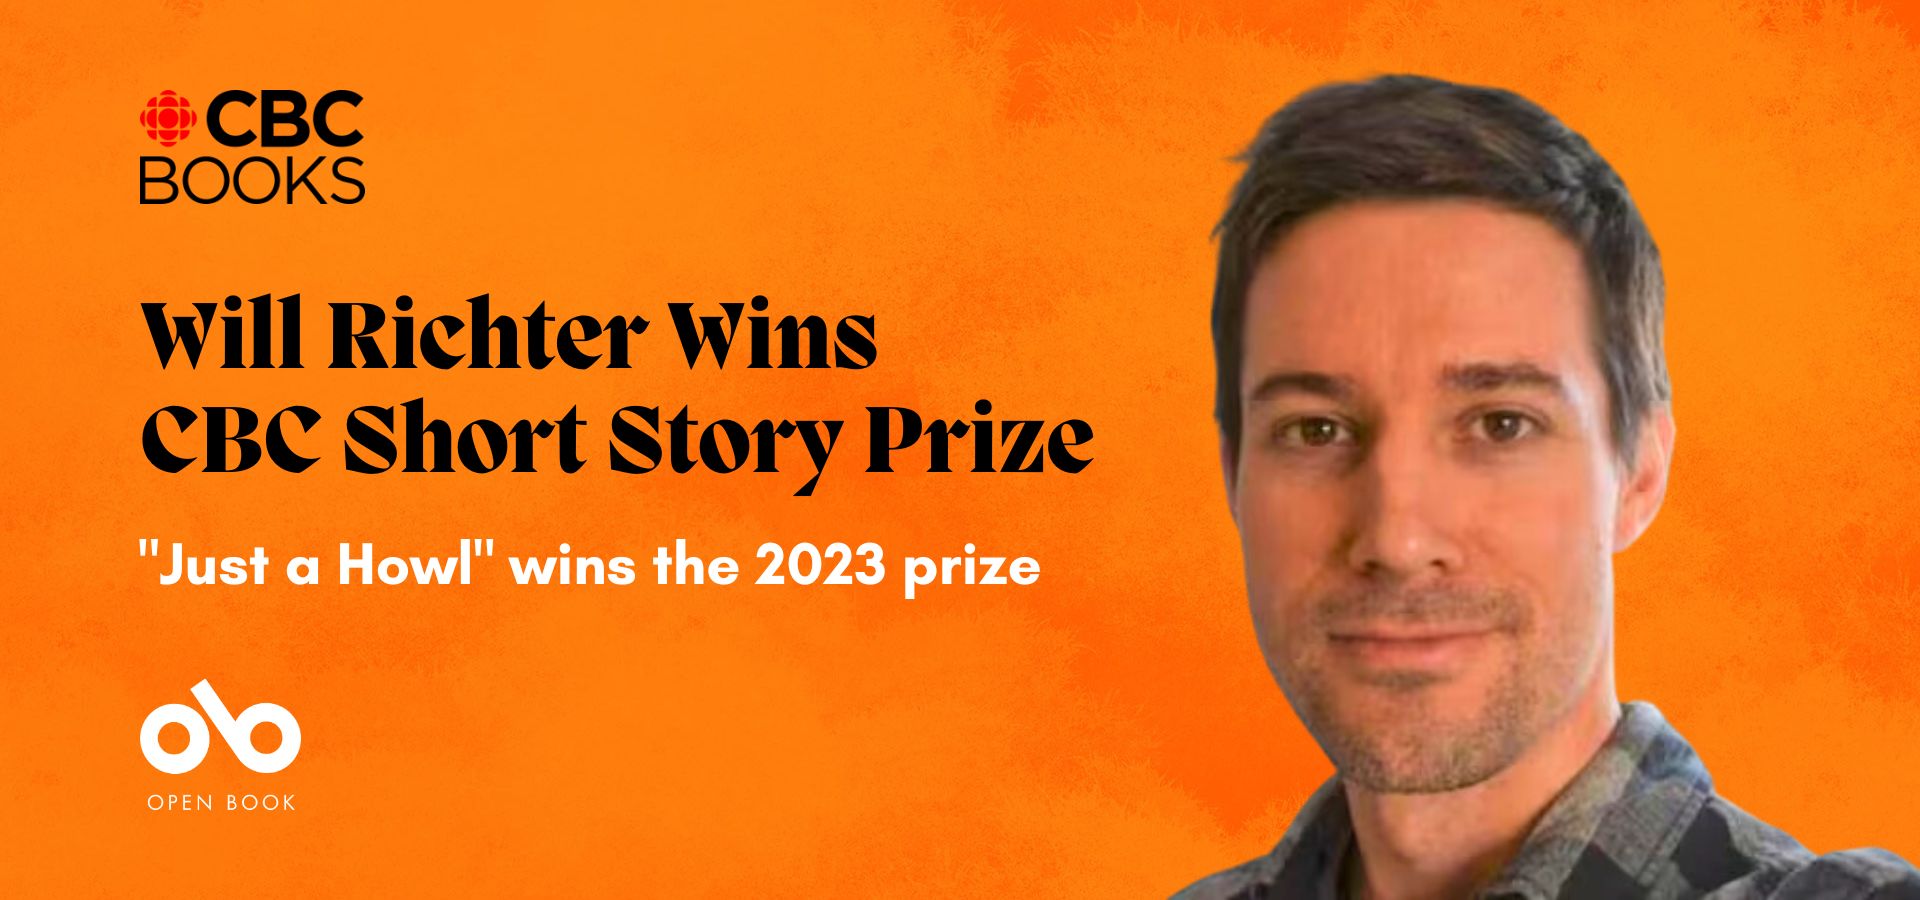 orange banner with photo of author Will Richter and text "Will Richter wins CBC Short Story Prize. "Just a Howl" wins 2023 prize"